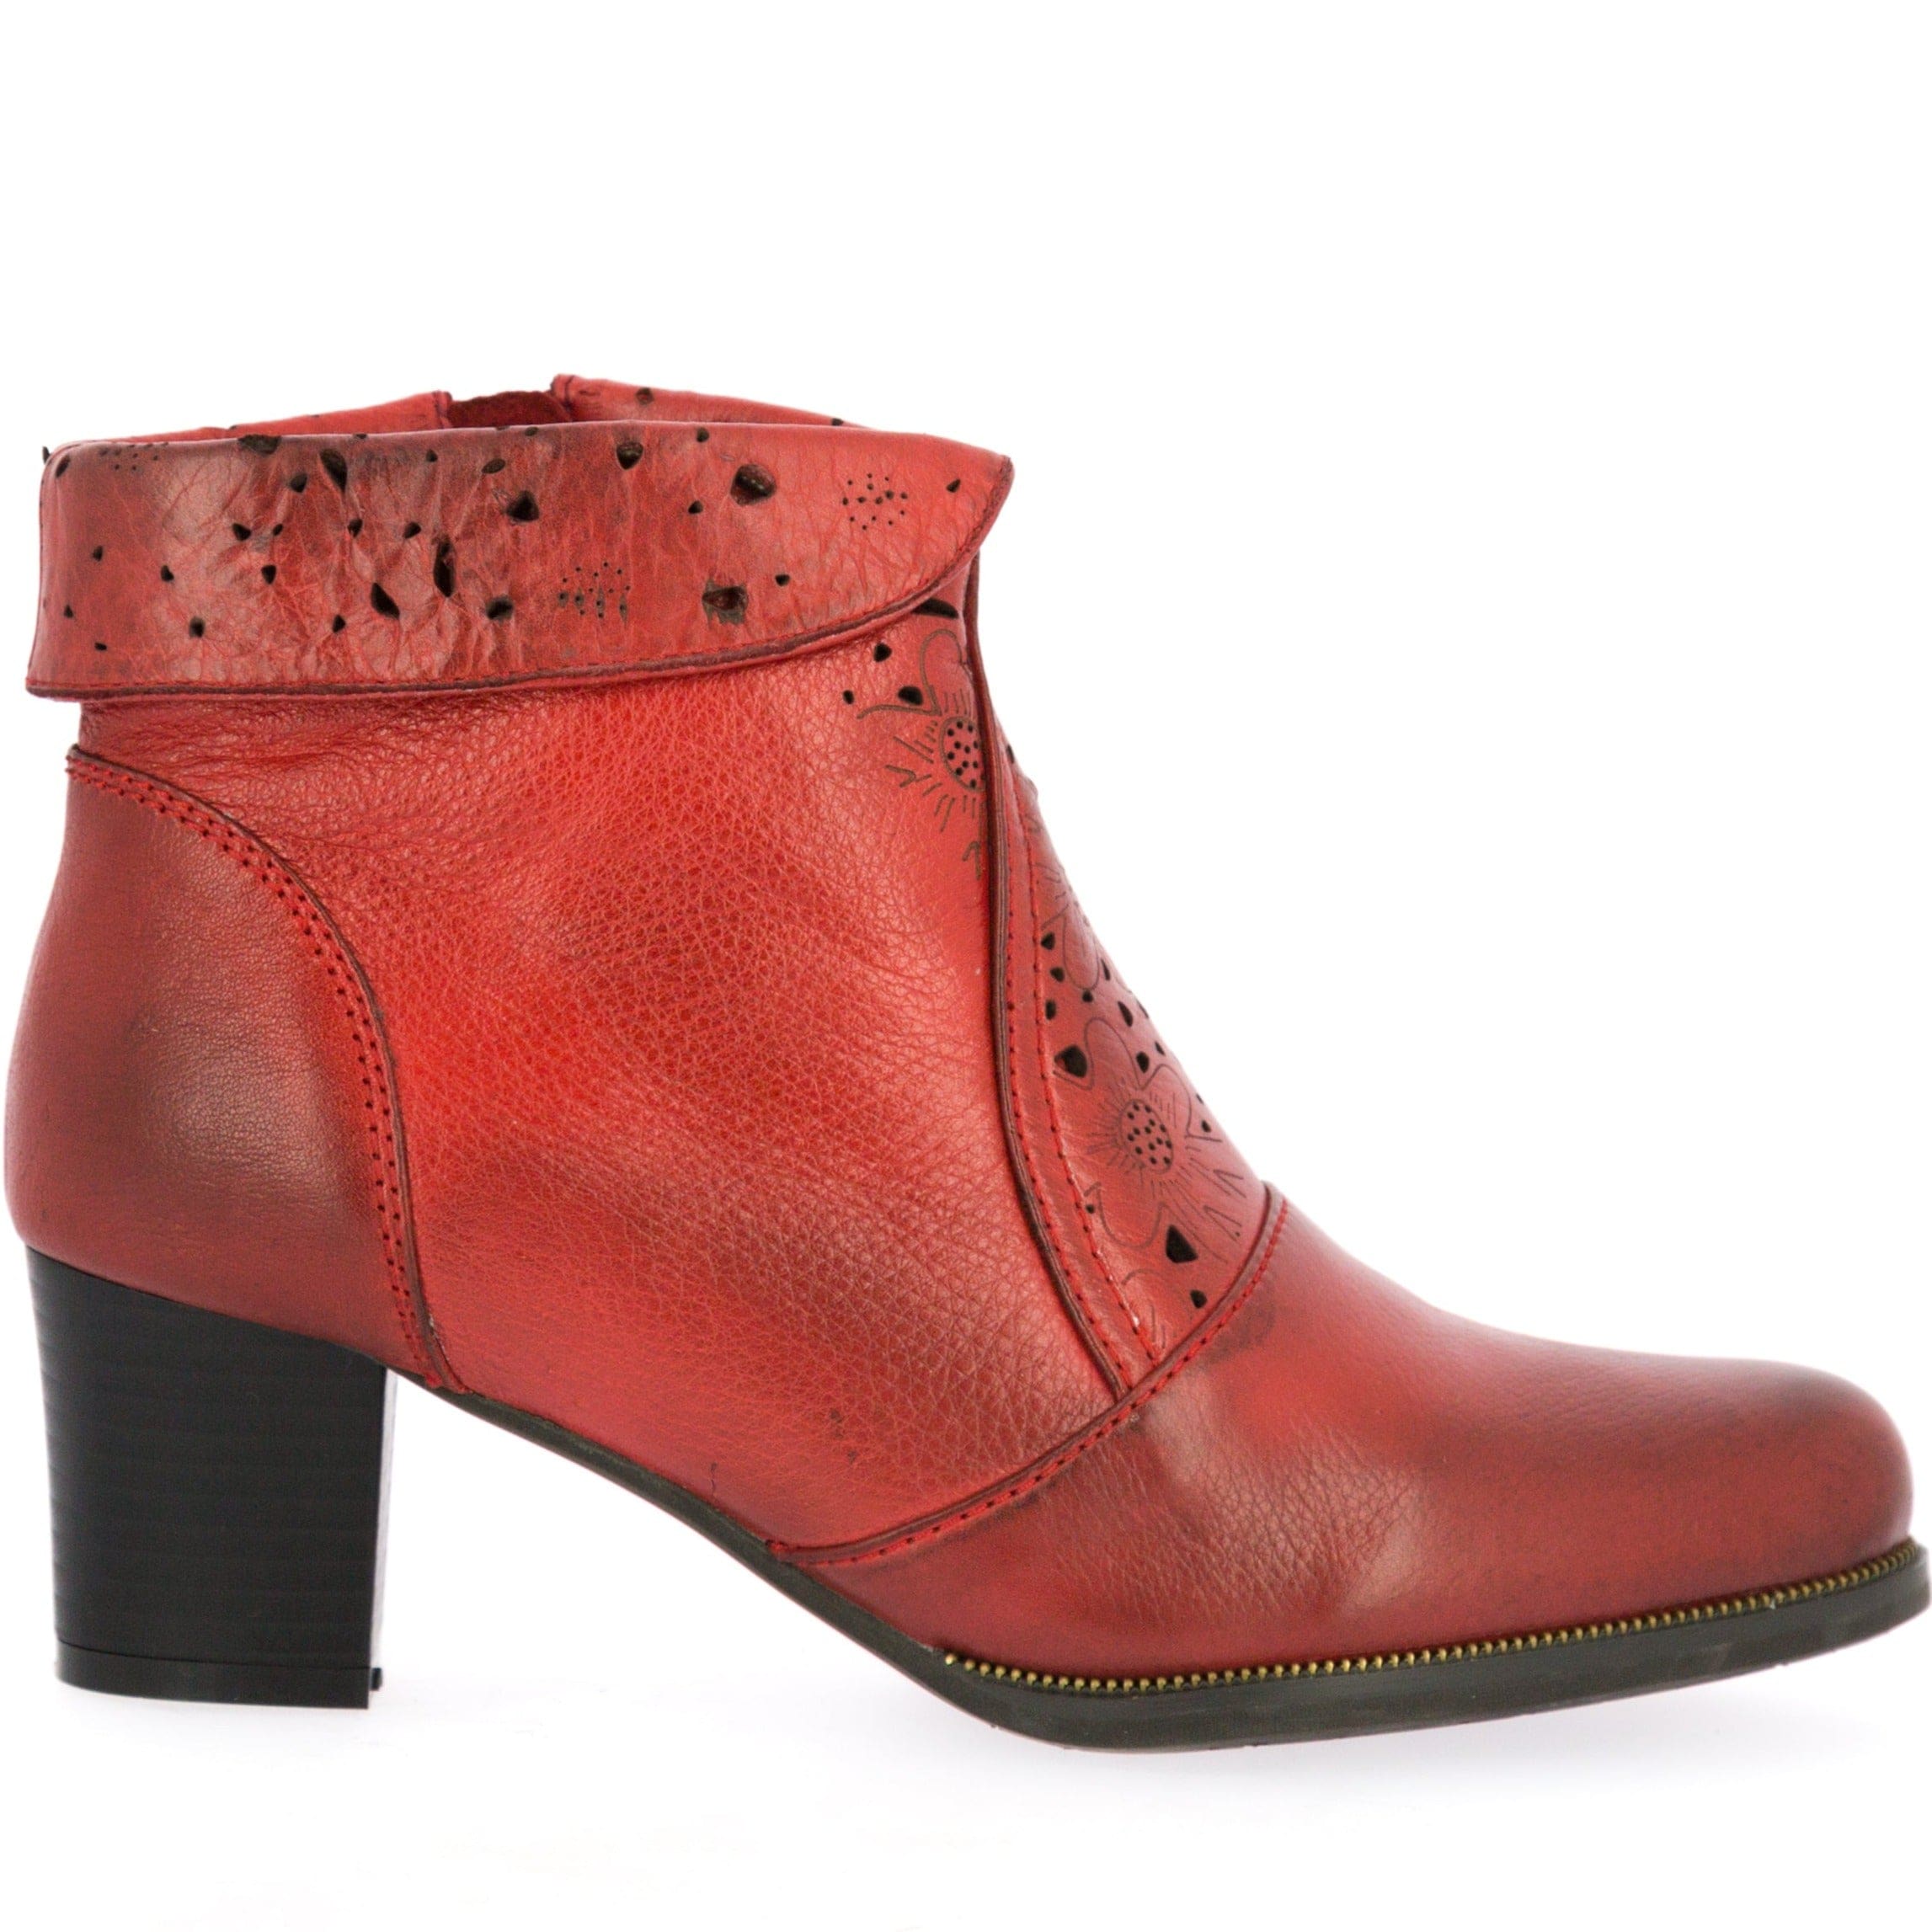 Chaussures AMELIA 02 - 37 / Rouge - Boots